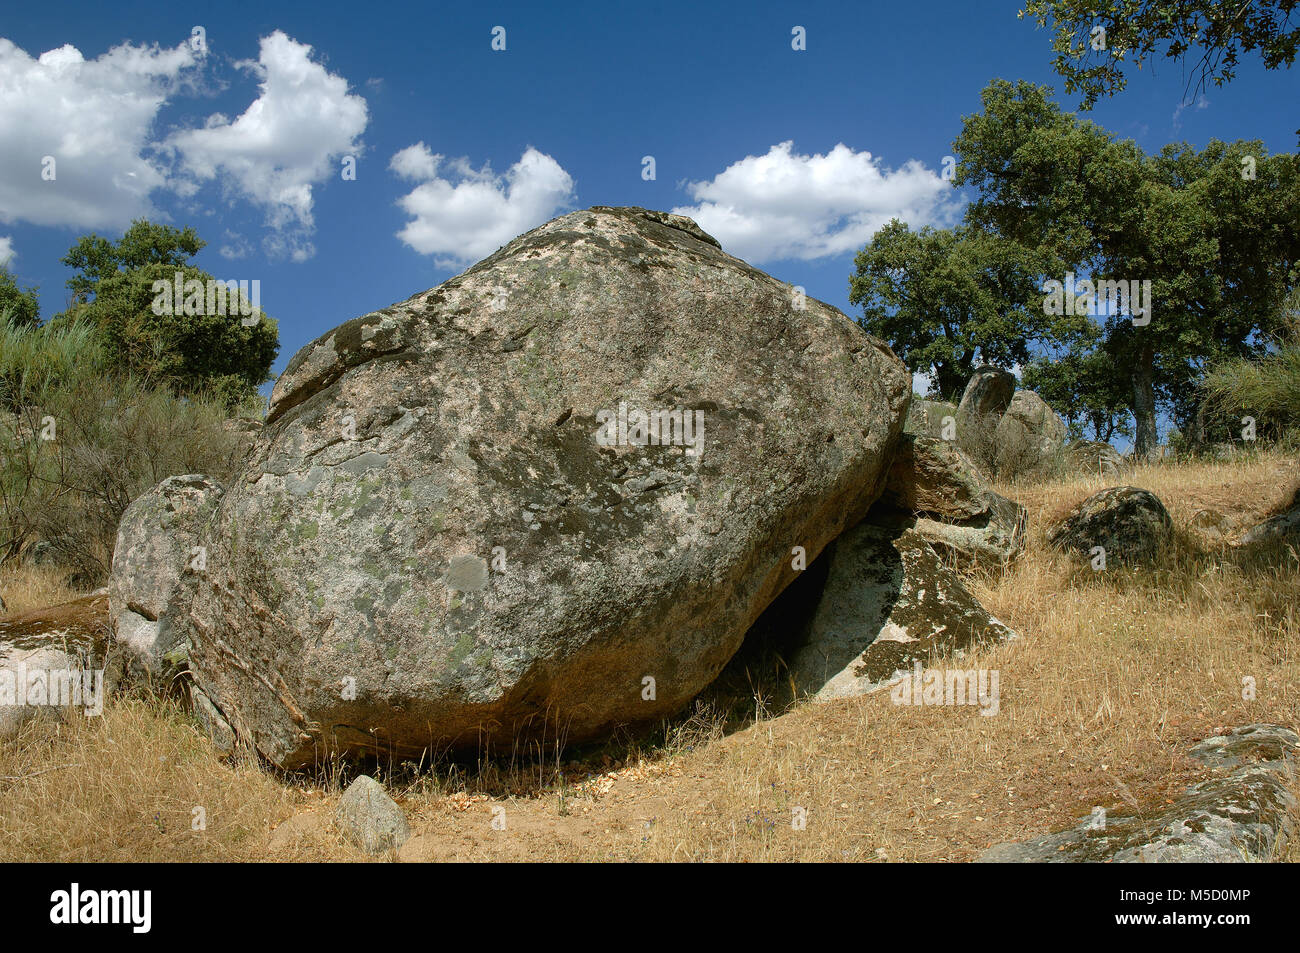 Granite eroded rock formation, Region of Los Pedroches, Cordoba province, Region of Andalusia, Spain, Europe Stock Photo